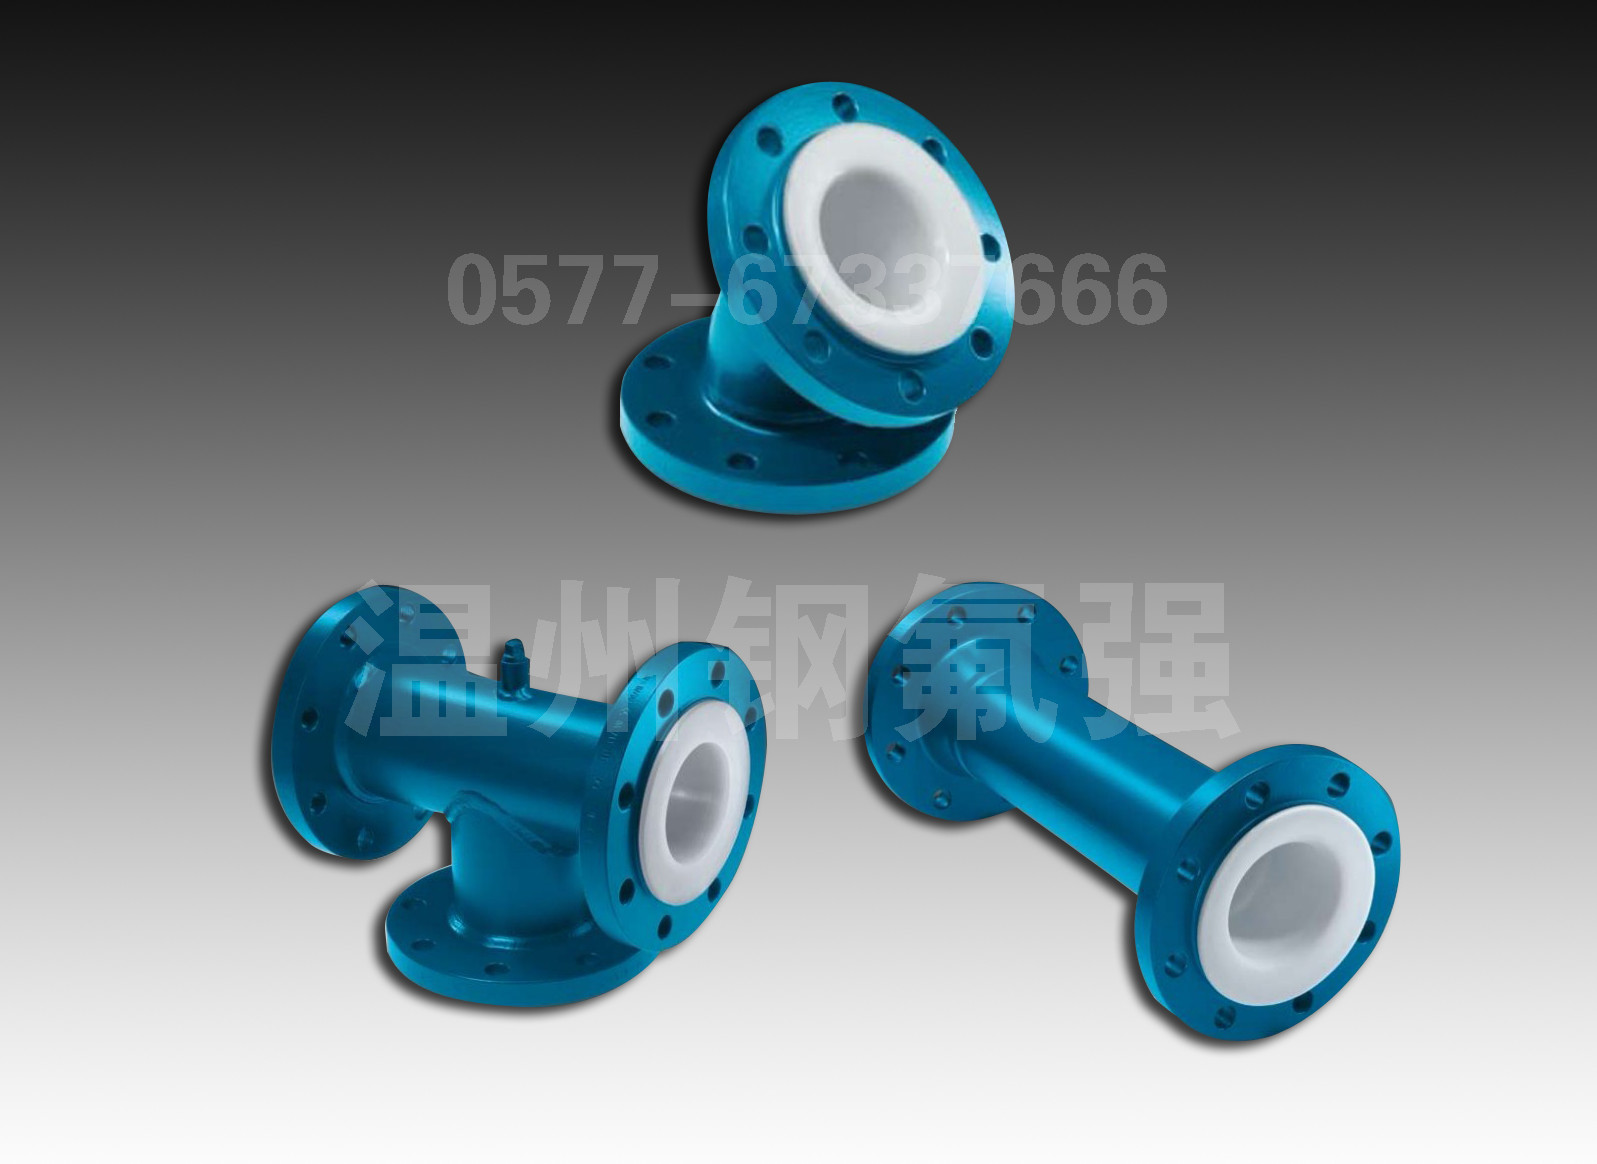 PTFE PTFE lined pipe fittings